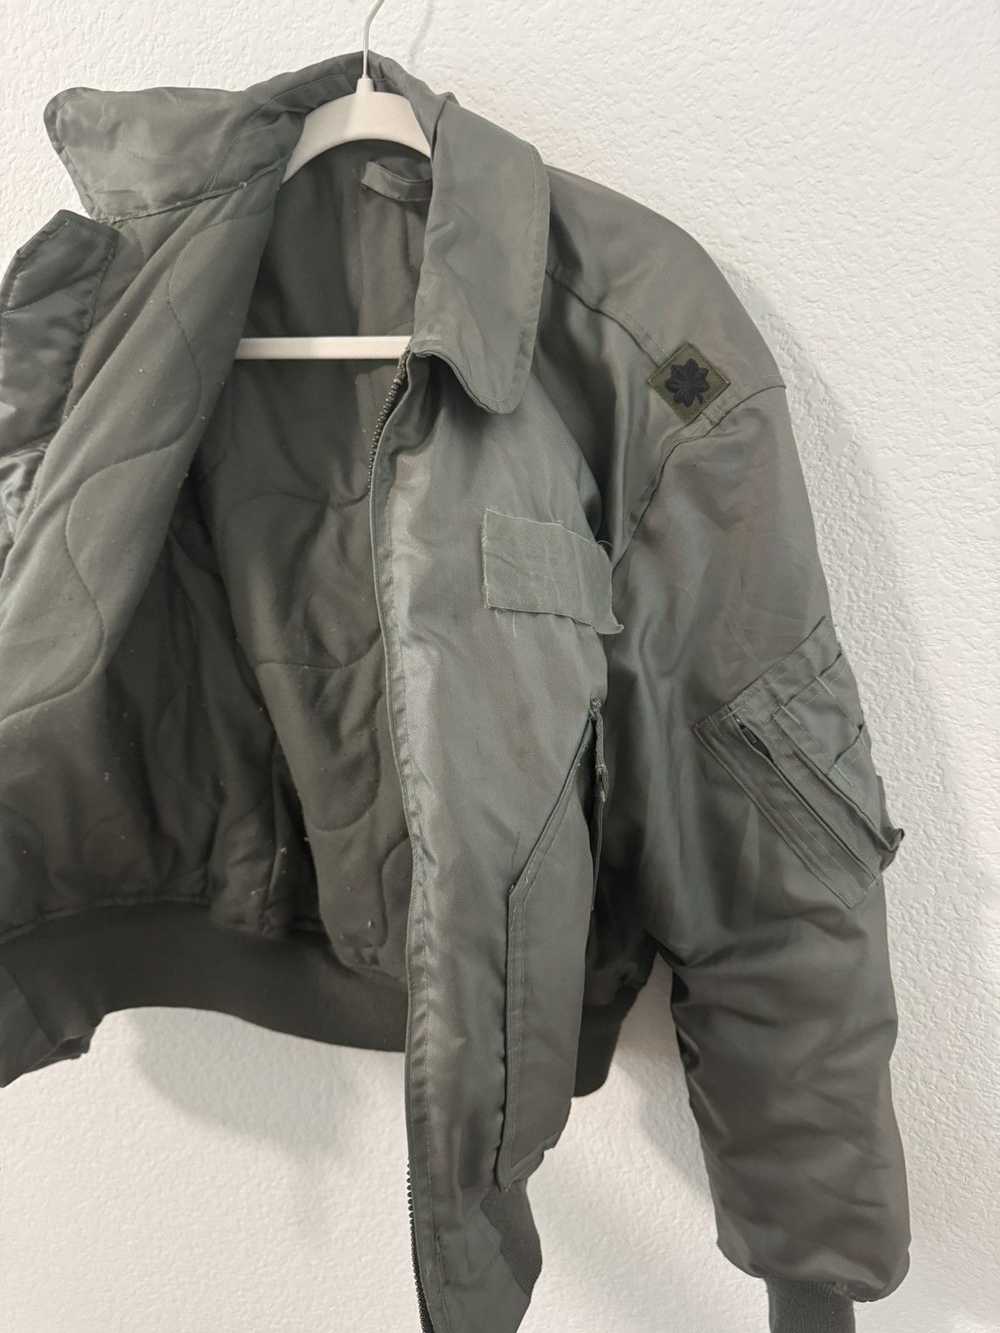 Vintage Vintage bomber jacket from the 50s - image 3